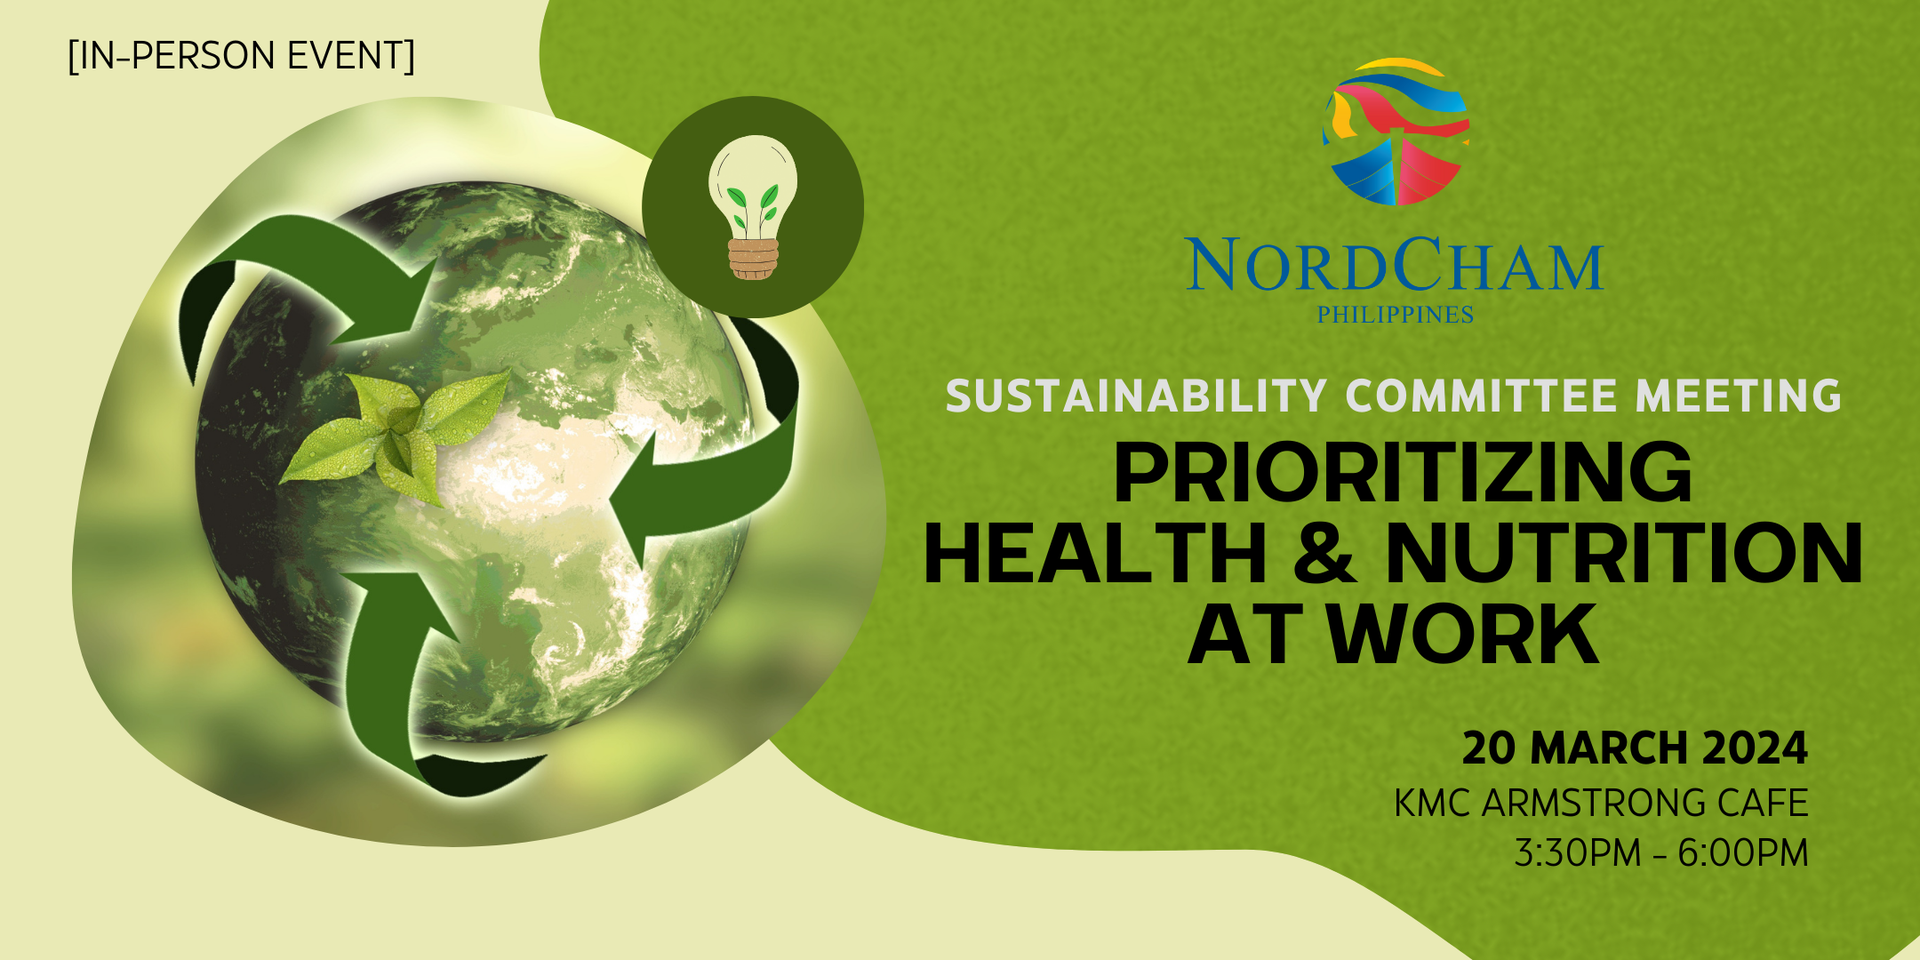 thumbnails SUSTAINABILITY COMMITTEE MEETING: PRIORITIZING HEALTH & NUTRITION AT WORK | 20 MARCH 2024 | KMC ARMSTRONG CAFE